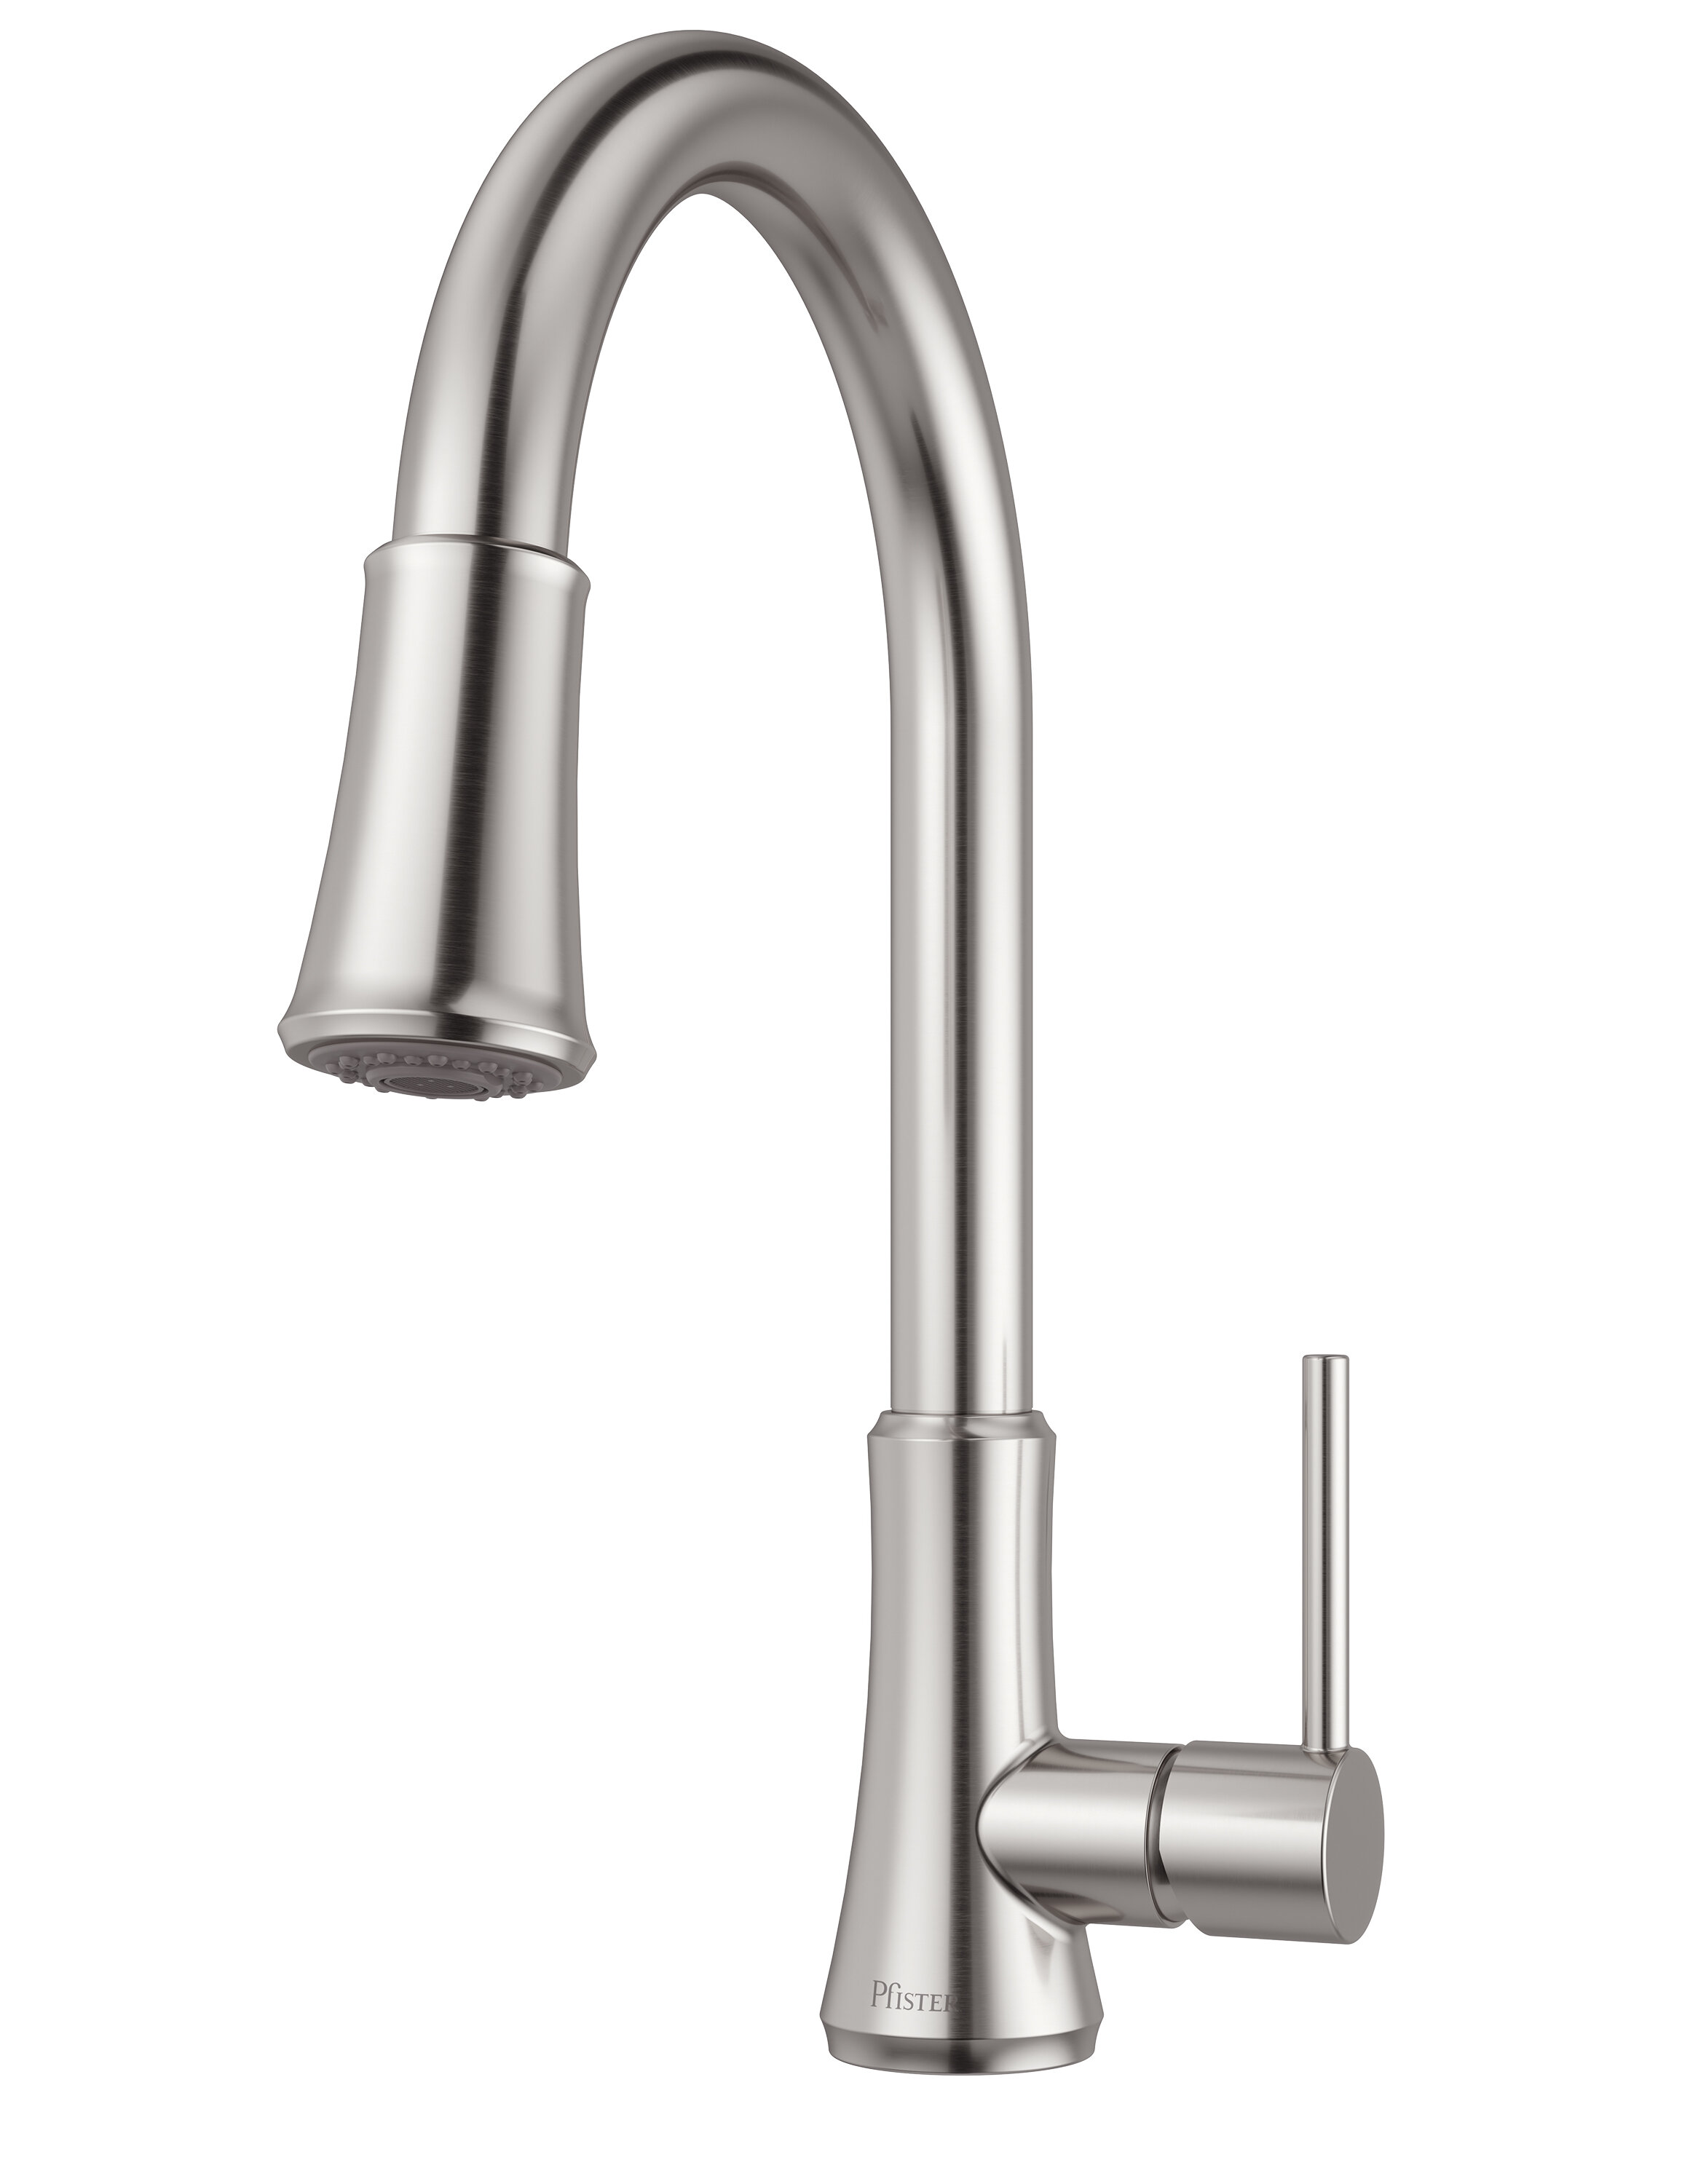 Pfister Pfirst Series Pull Down Touch Single Handle Kitchen Faucet